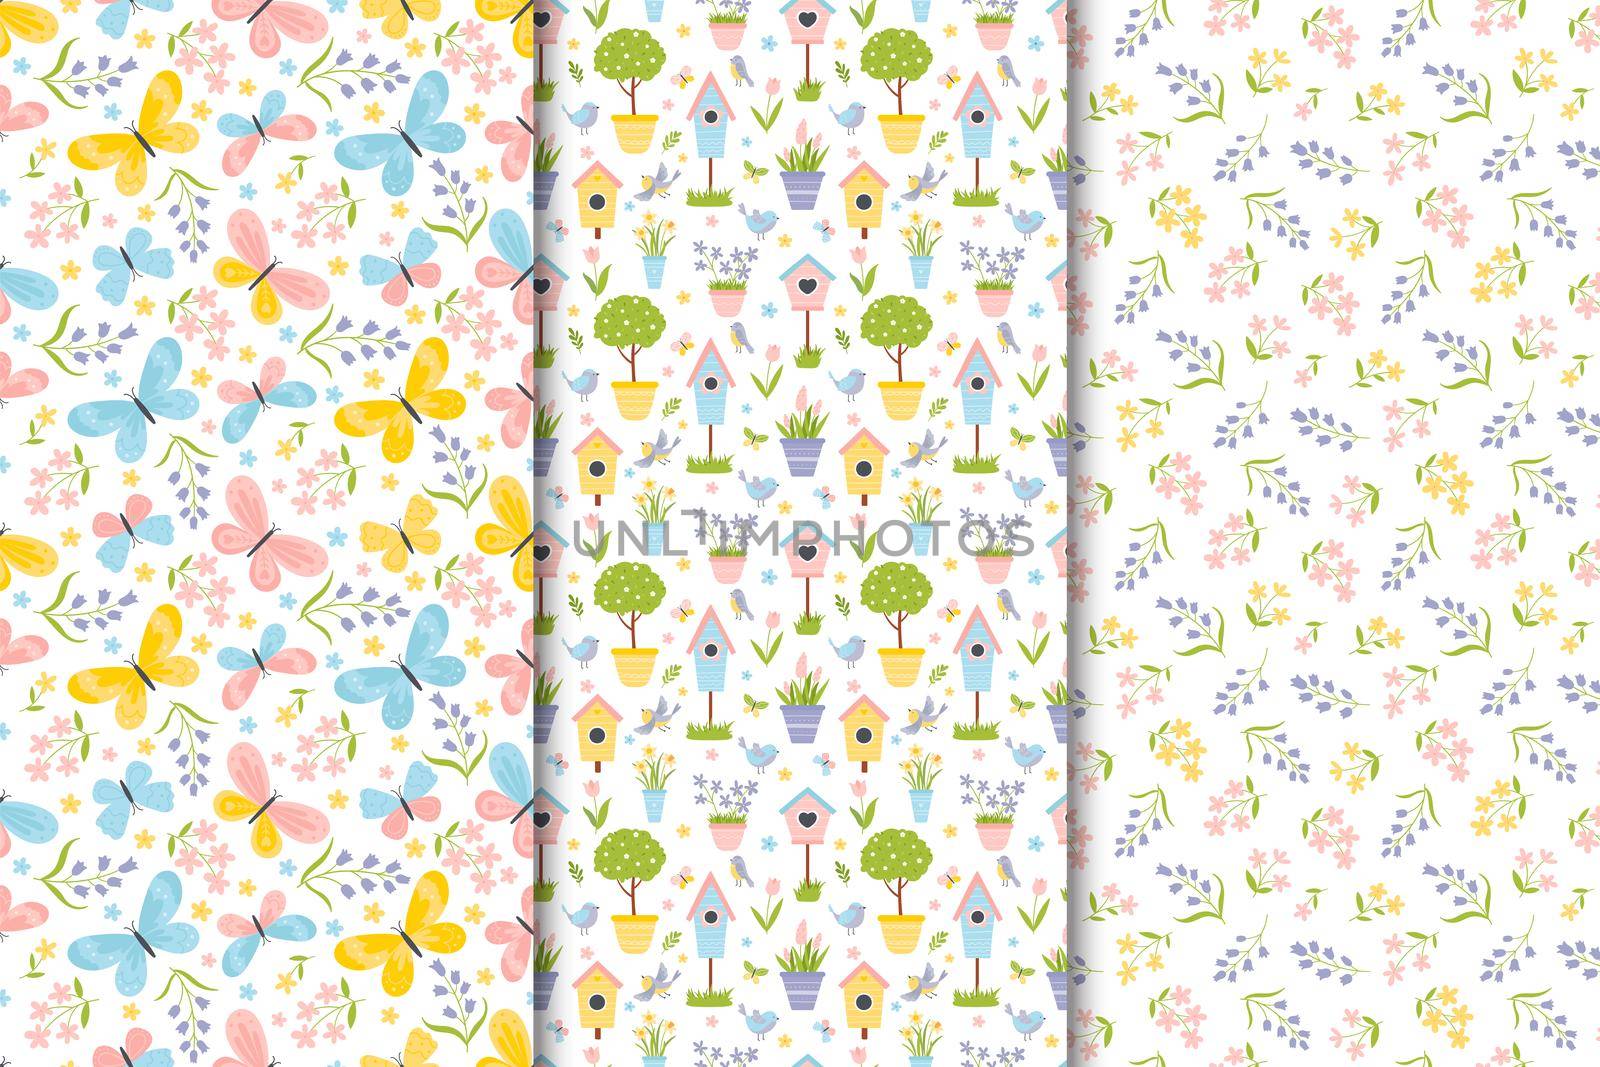 Spring set of seamless patterns in flat hand drawn cartoon style. Vector children's colorful illustration of a bird, potted plants, flowers, birdhouses, butterflies. Spring or summer colorful background for fabric, cover, wrapping paper, etc.